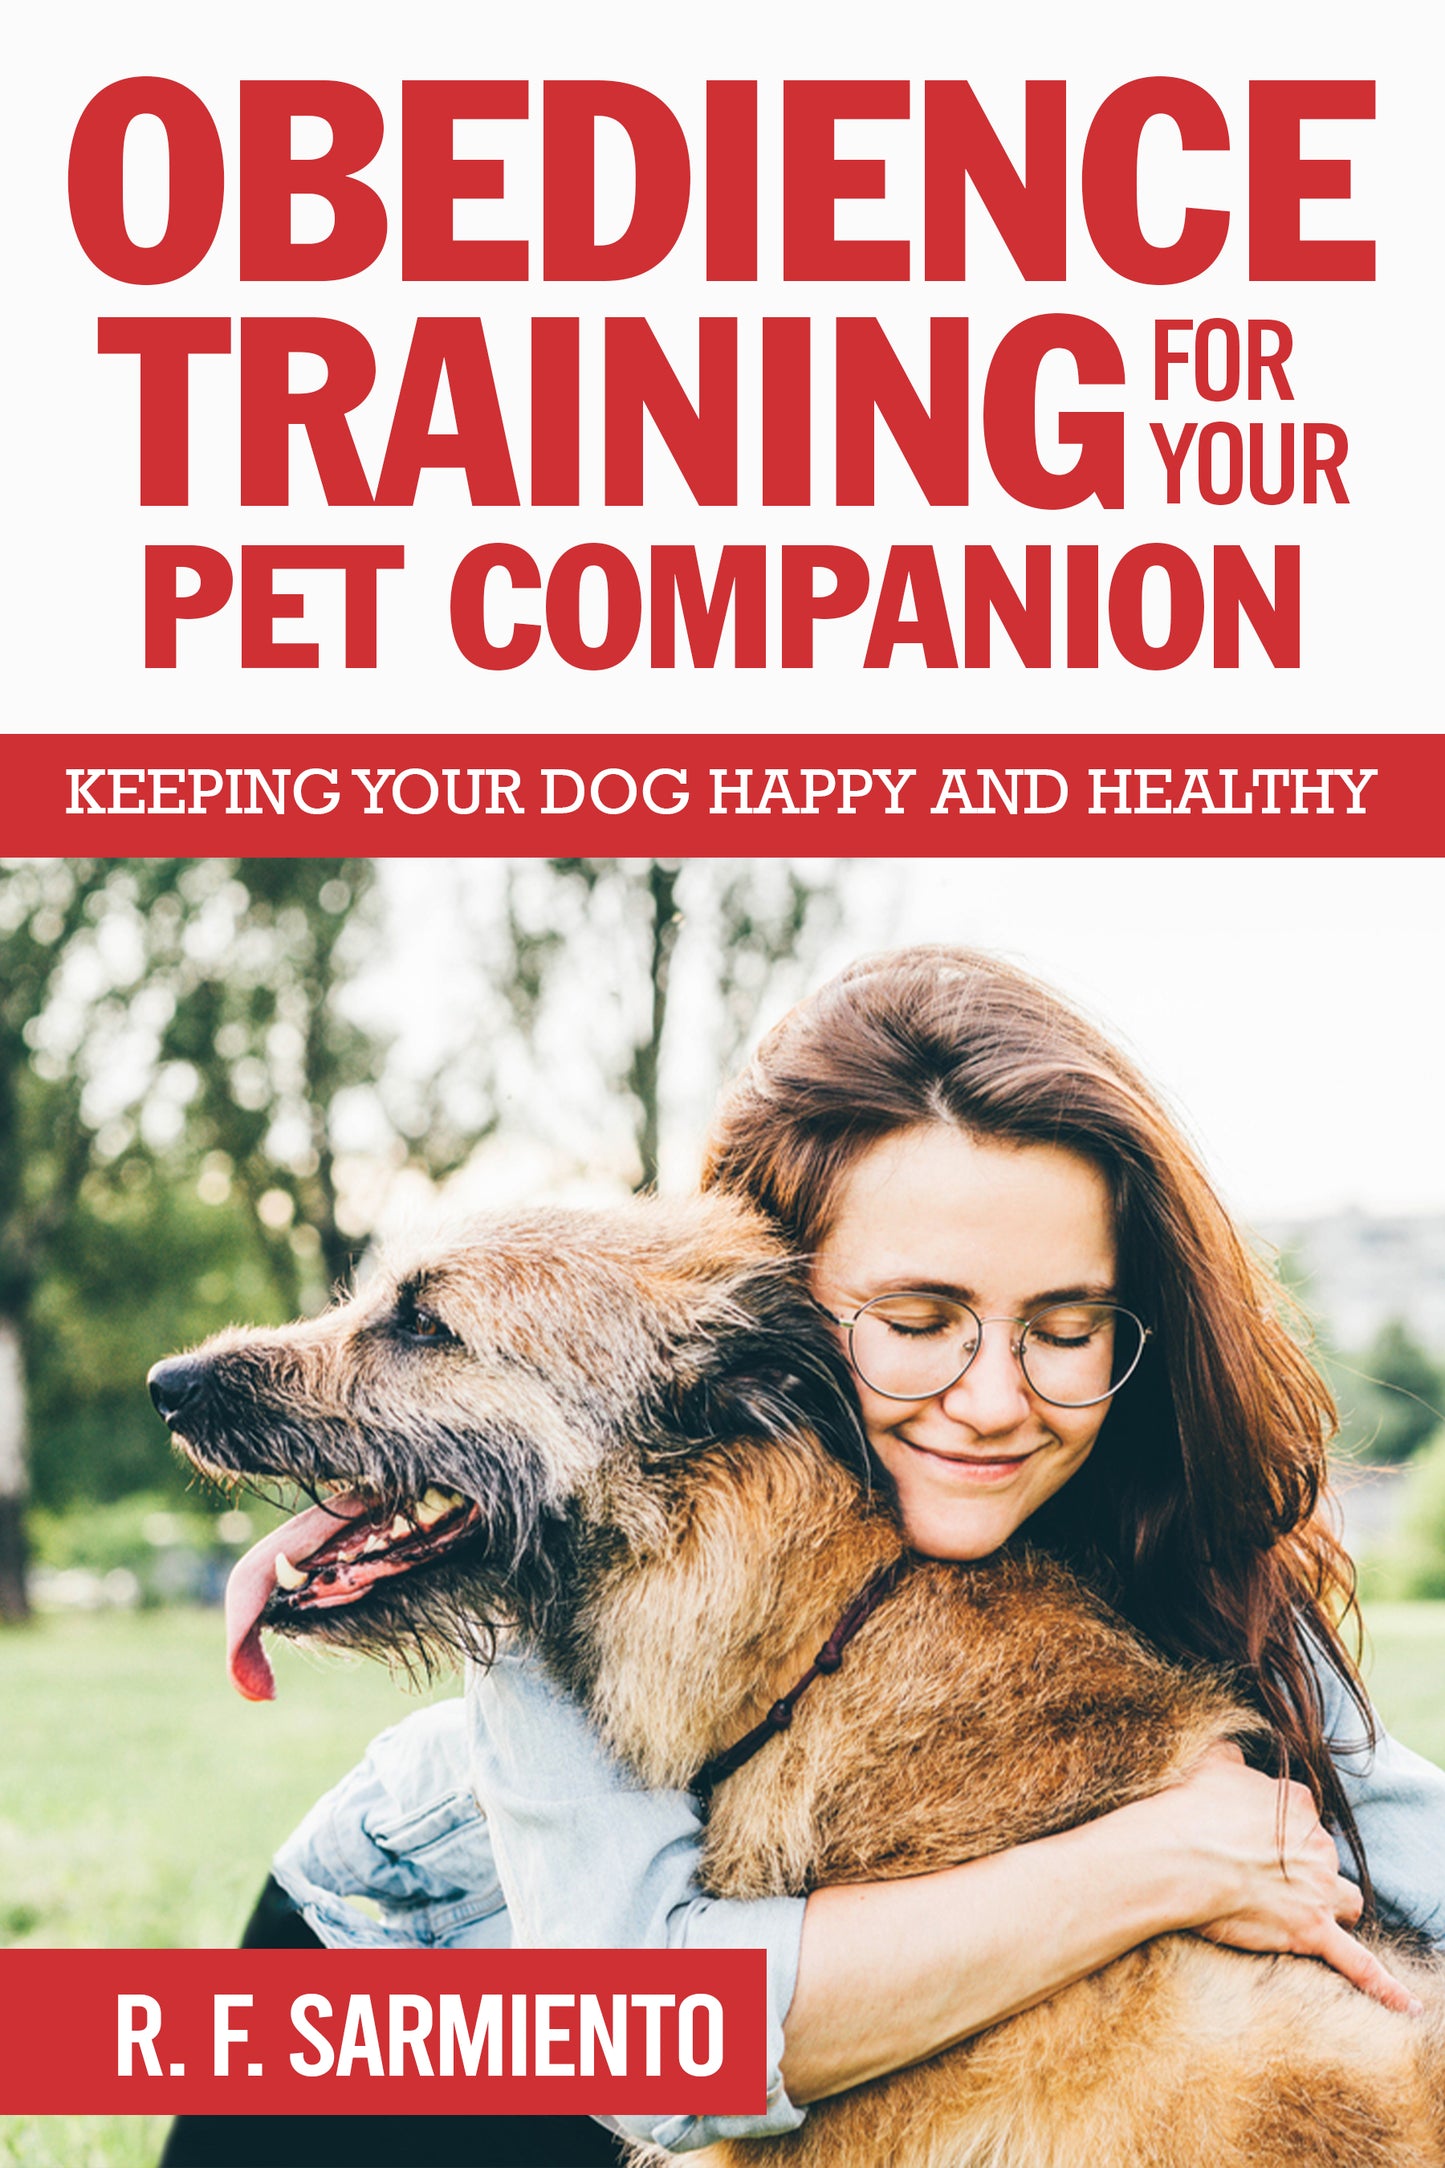 Obedience Training for Your Pet Companion: Keeping Your Dog Happy and Healthy